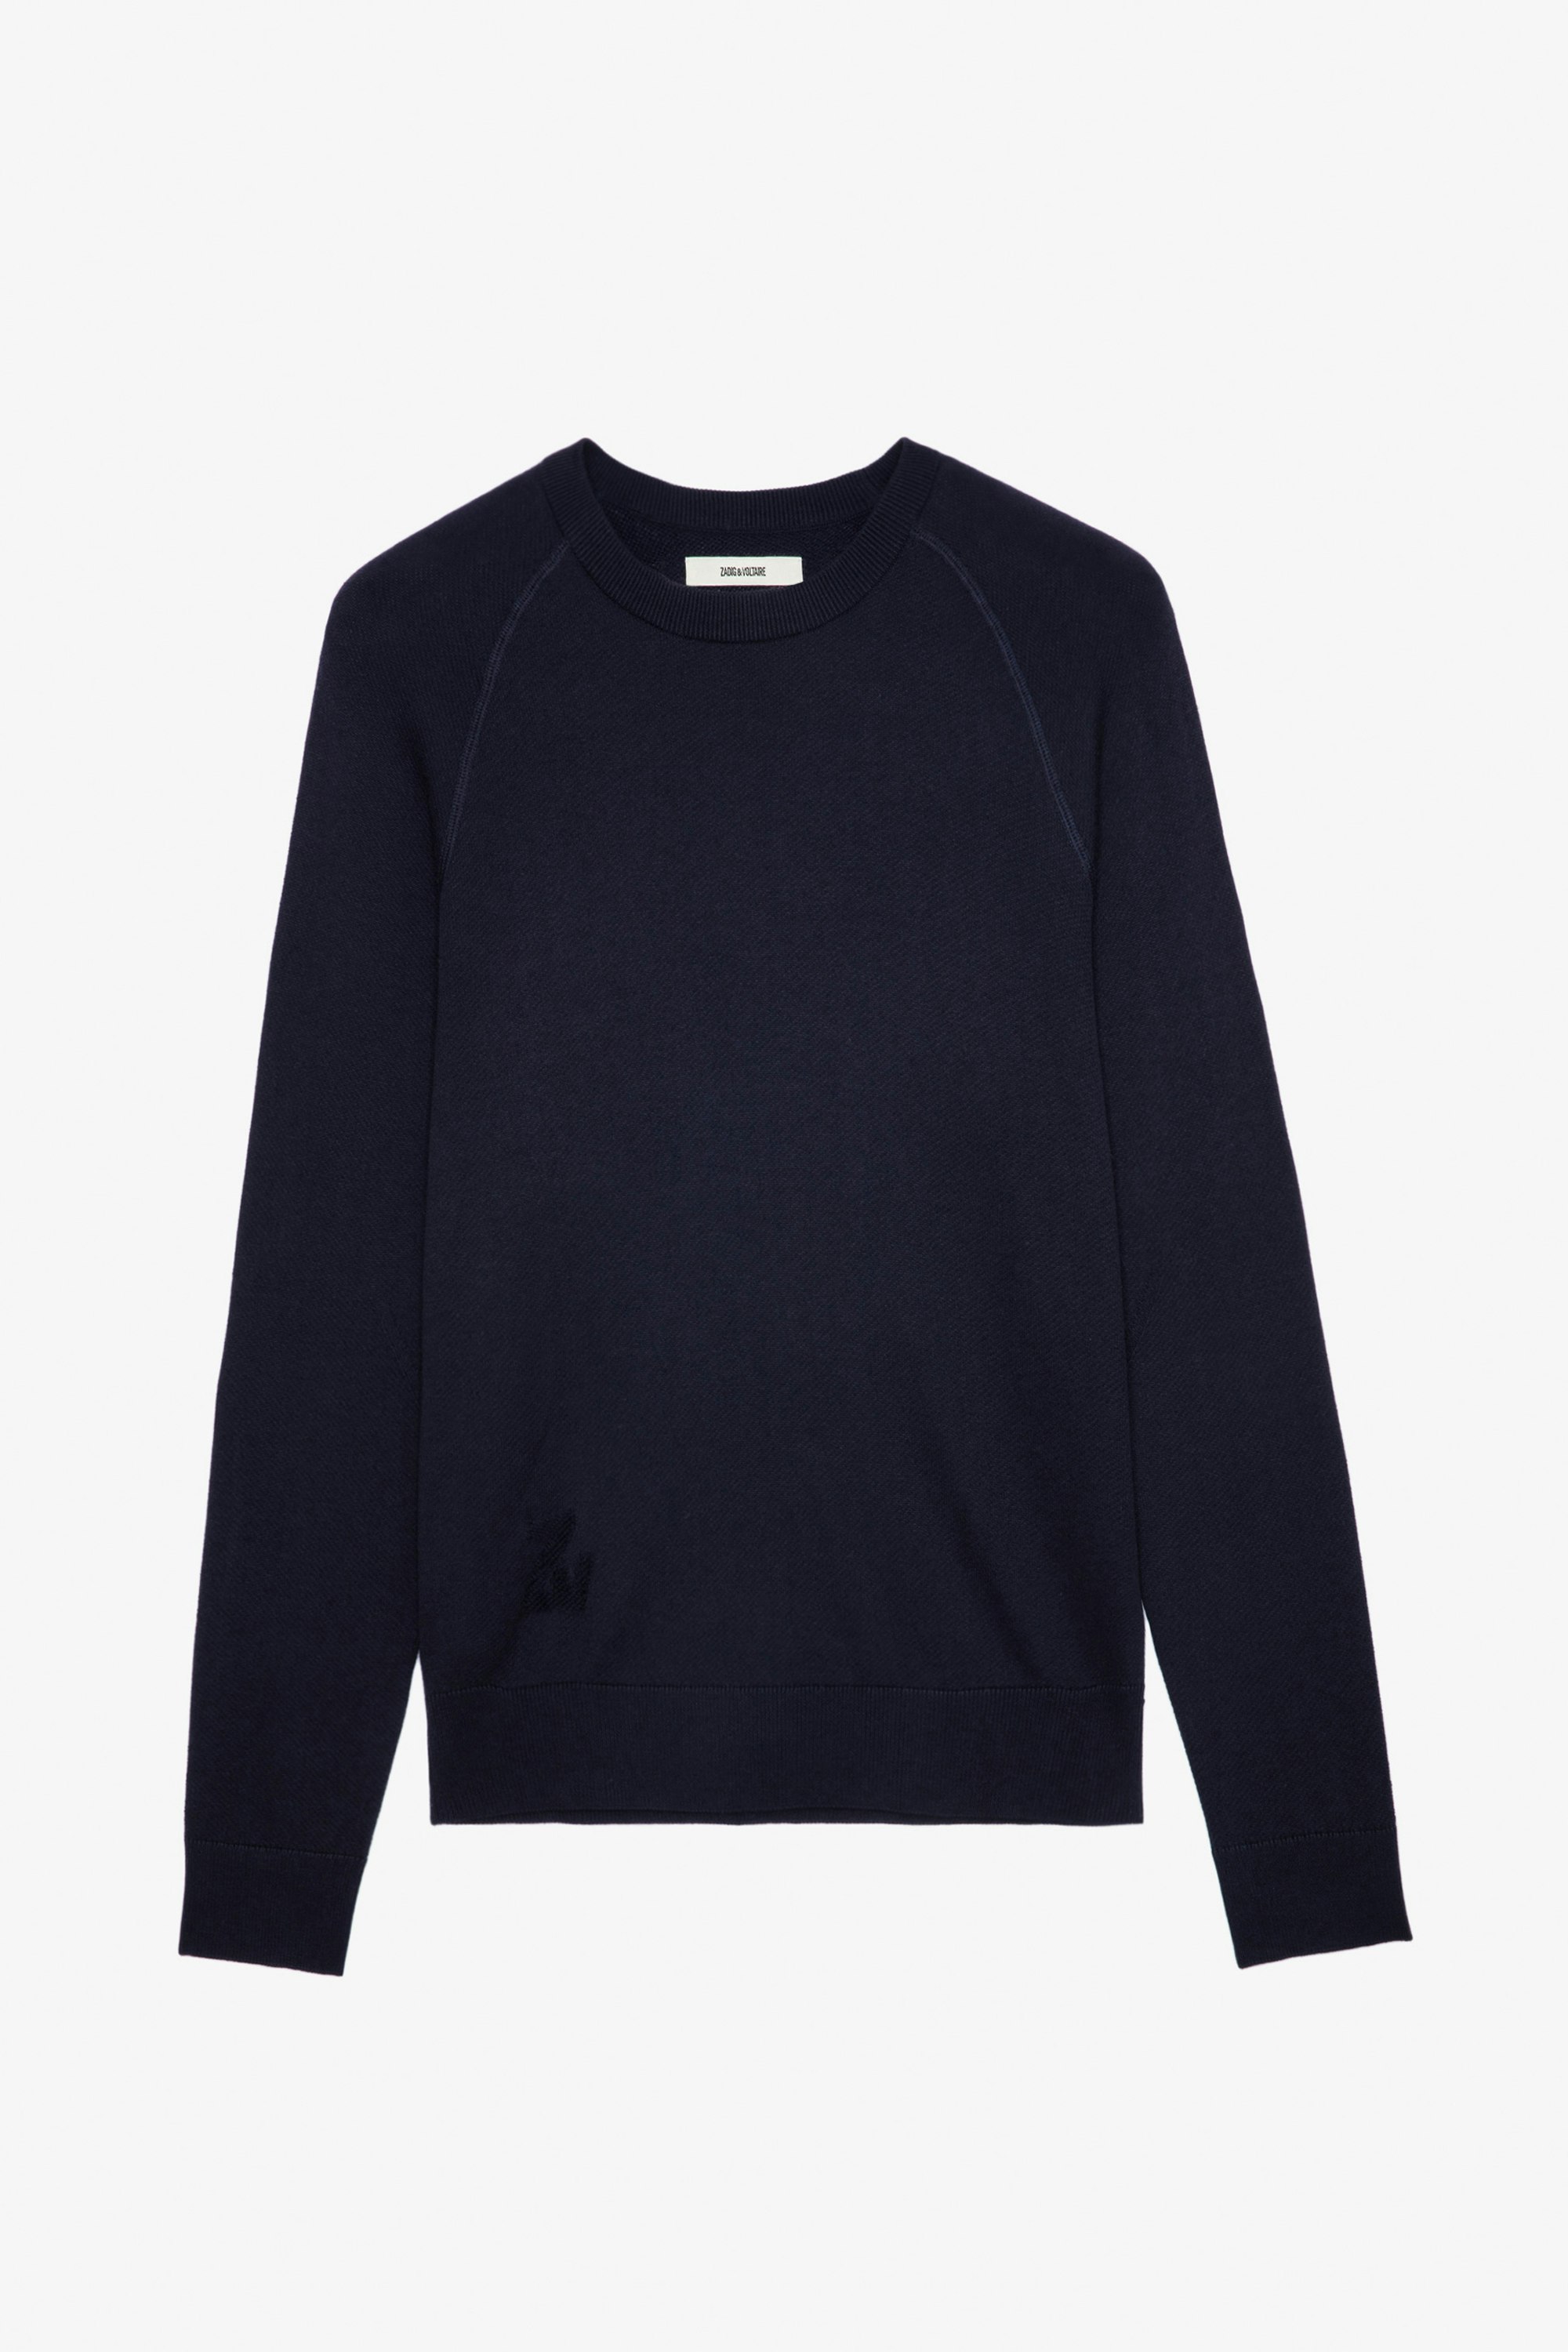 Thomaso Sweater - Men’s navy blue sweatshirt with ZV embroidery.